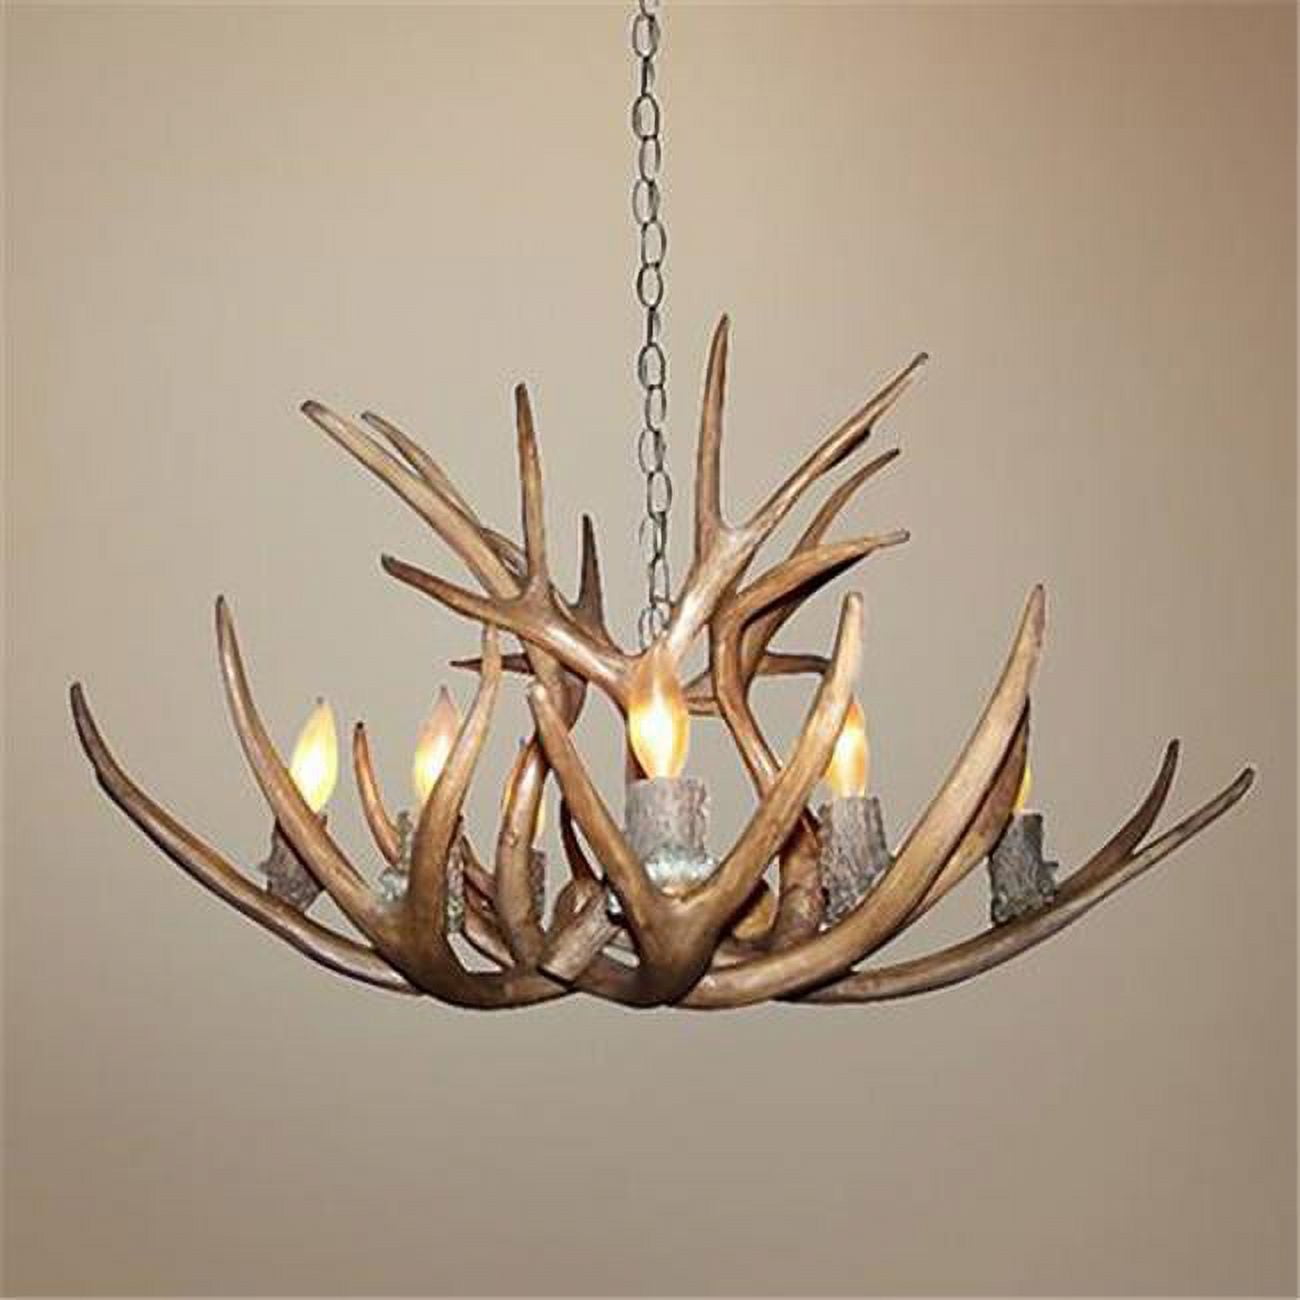 Cdn Antler Design Unsfmdca-16ant-xl Reproduction Antler Mule Deer 8 Light Sockets Chandelier With 6 Ft. Rustic Bronze Chain - Extra Large